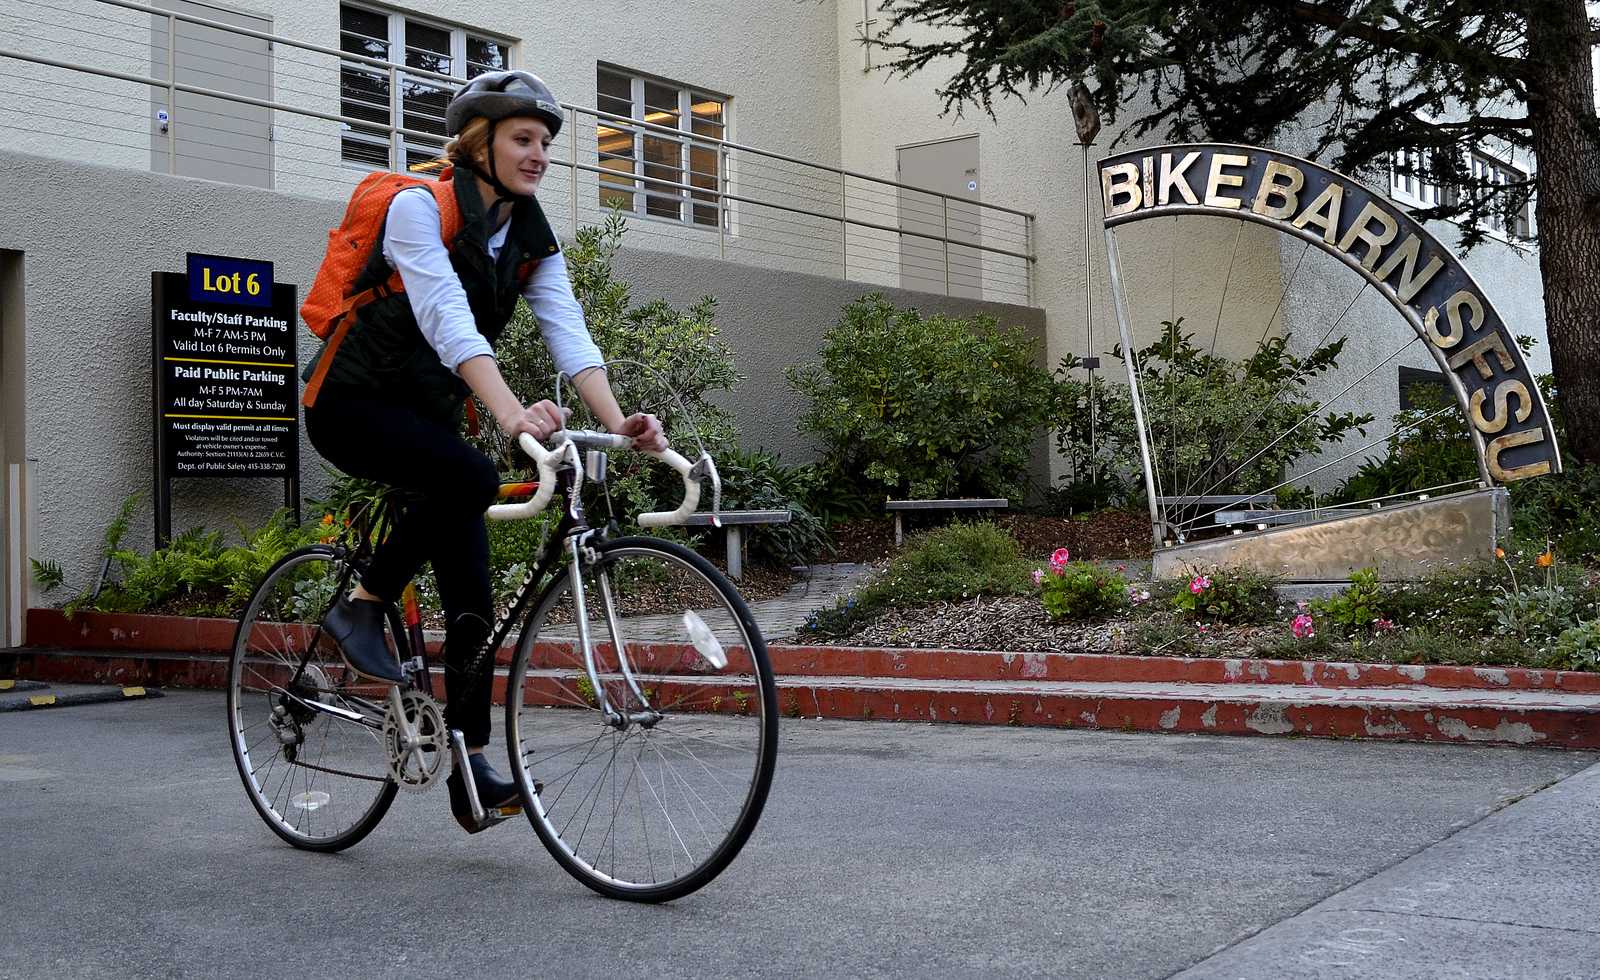 Laura Melroy 25-years-old a grad student biology major (MS ecology evolution conservation) rides out of the Bike Barn at SF State towards the nearest bike path, Thursday, Oct. 31, 2013. Four new sustainability courses are coming to SF State, one of them is called Bicycle Geographies starting in the Spring of 2014 about alternative transportation, bicycles and bike paths and more. Photo by Amanda Peterson / Xpress 